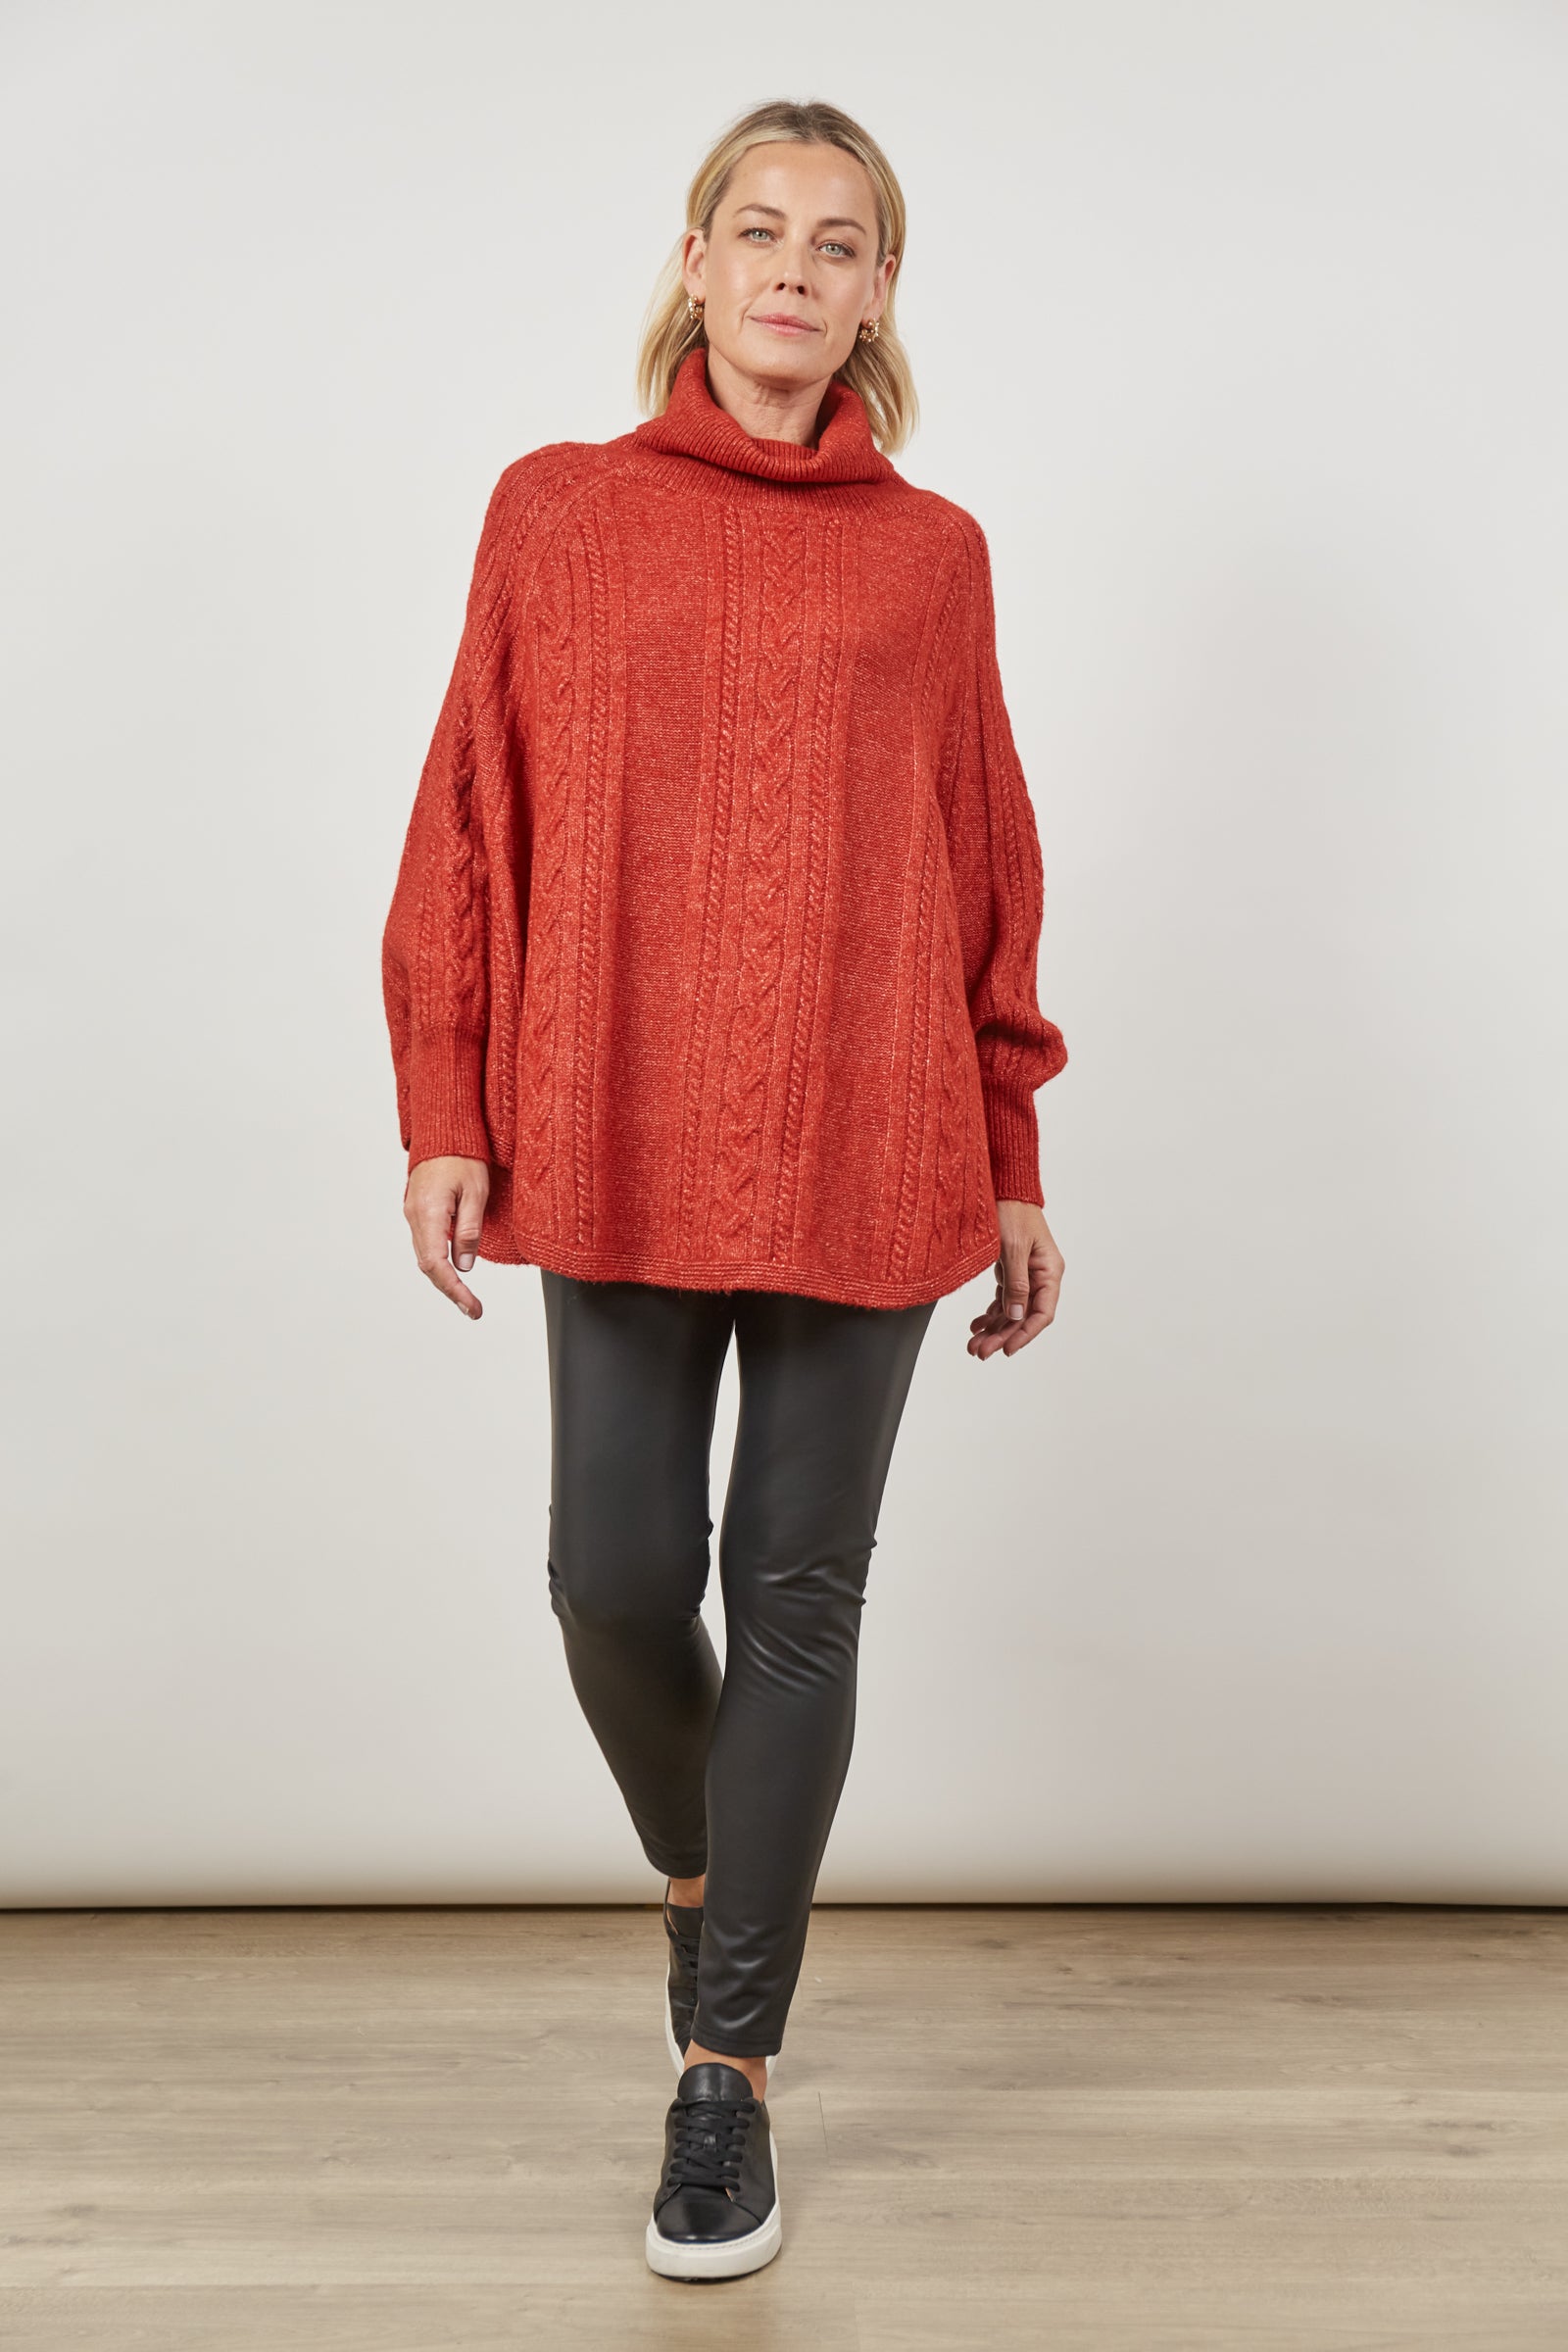 Renew Poncho - Picante - Isle of Mine Clothing - Knit Poncho One Size